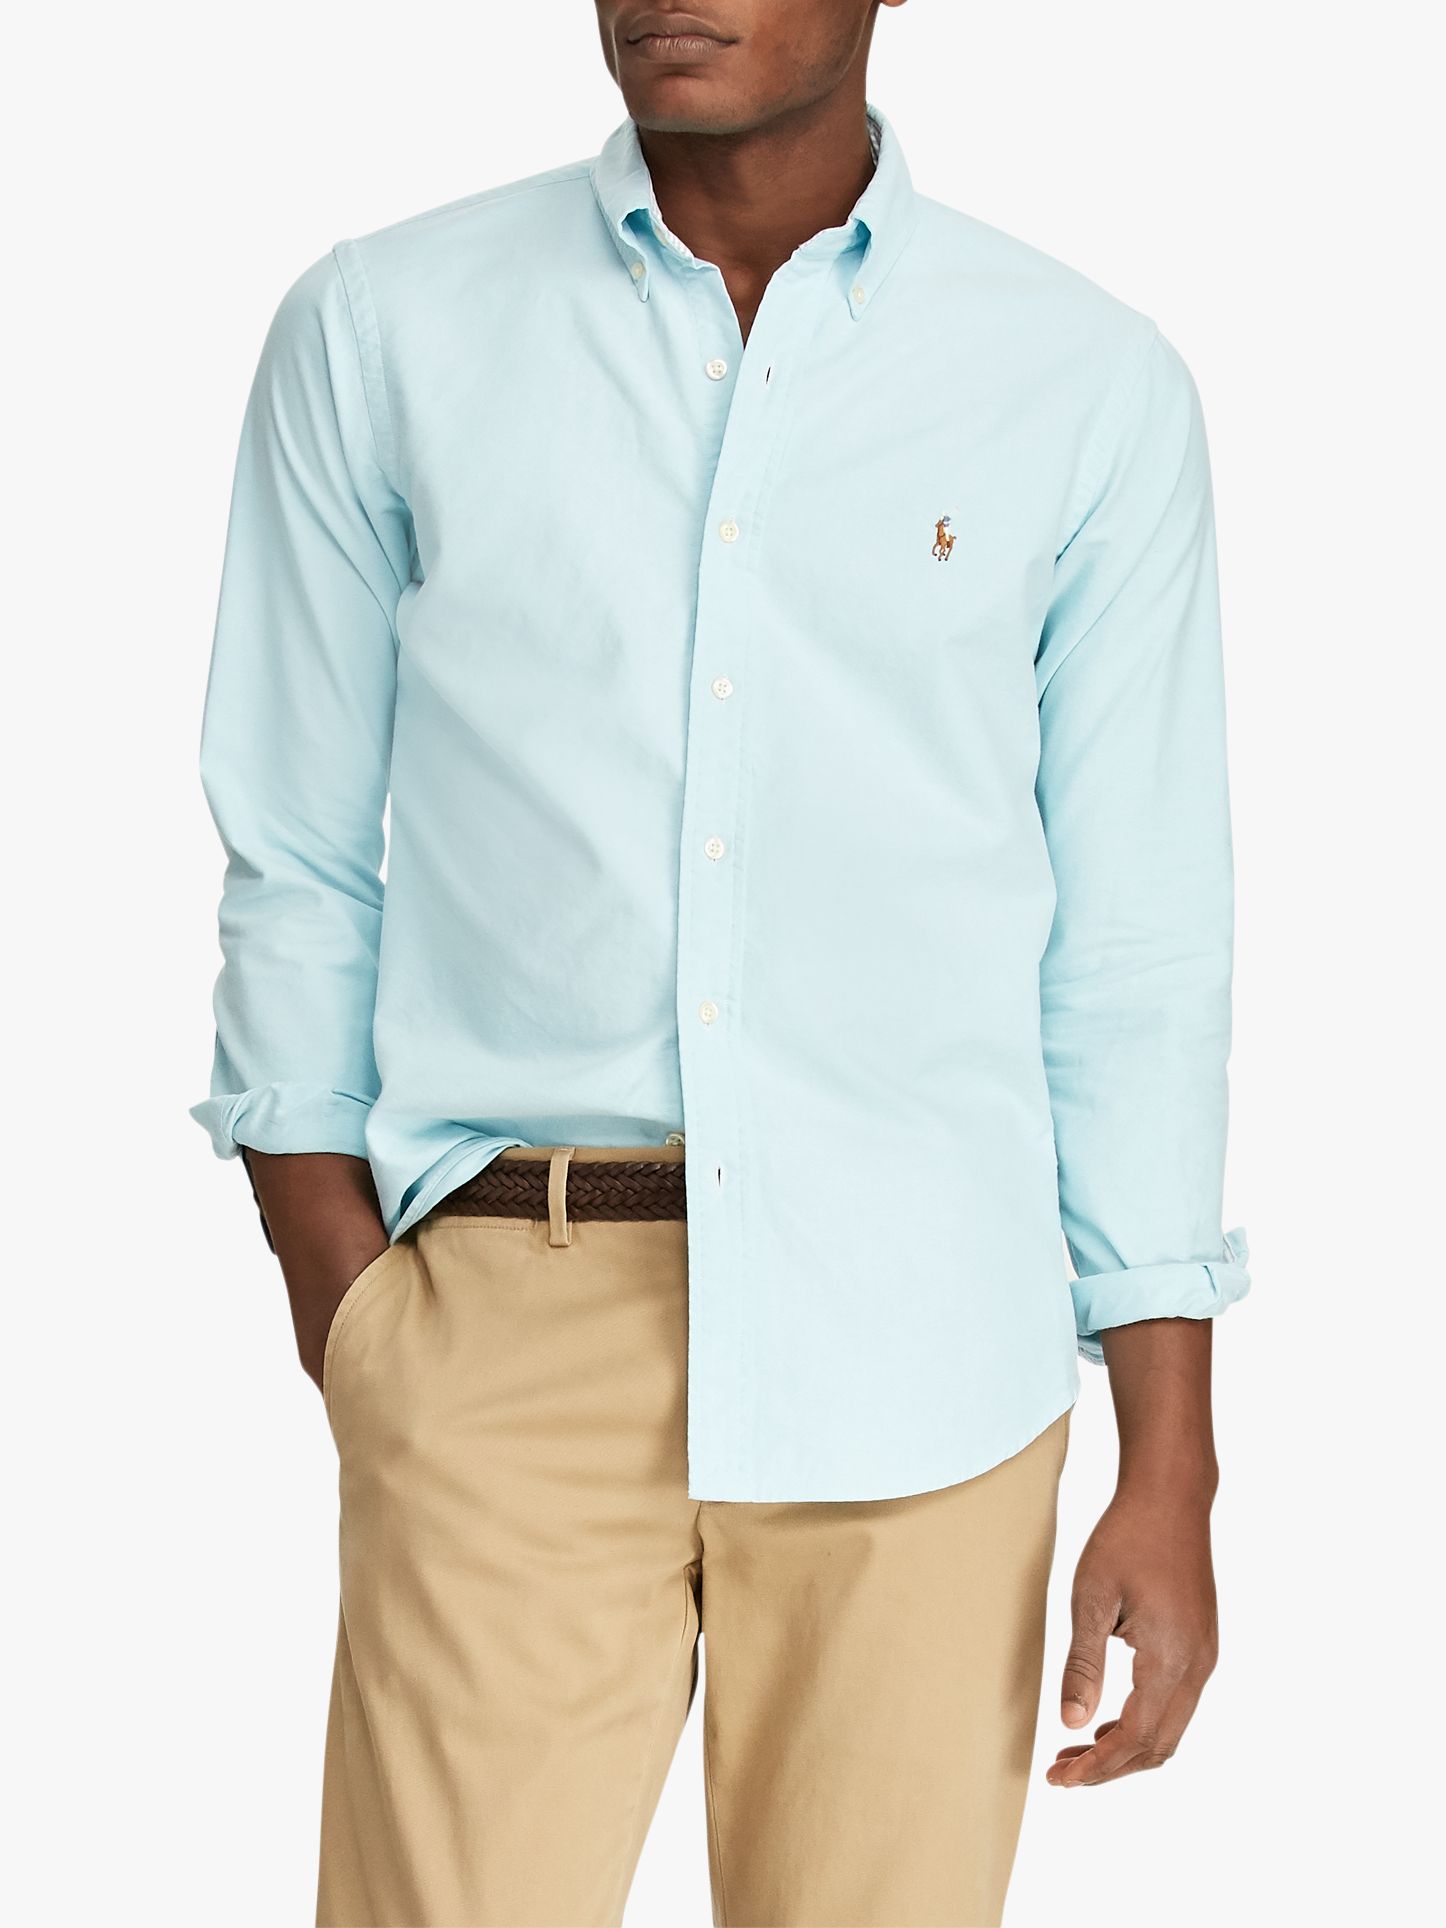 polo classic fit oxford shirt